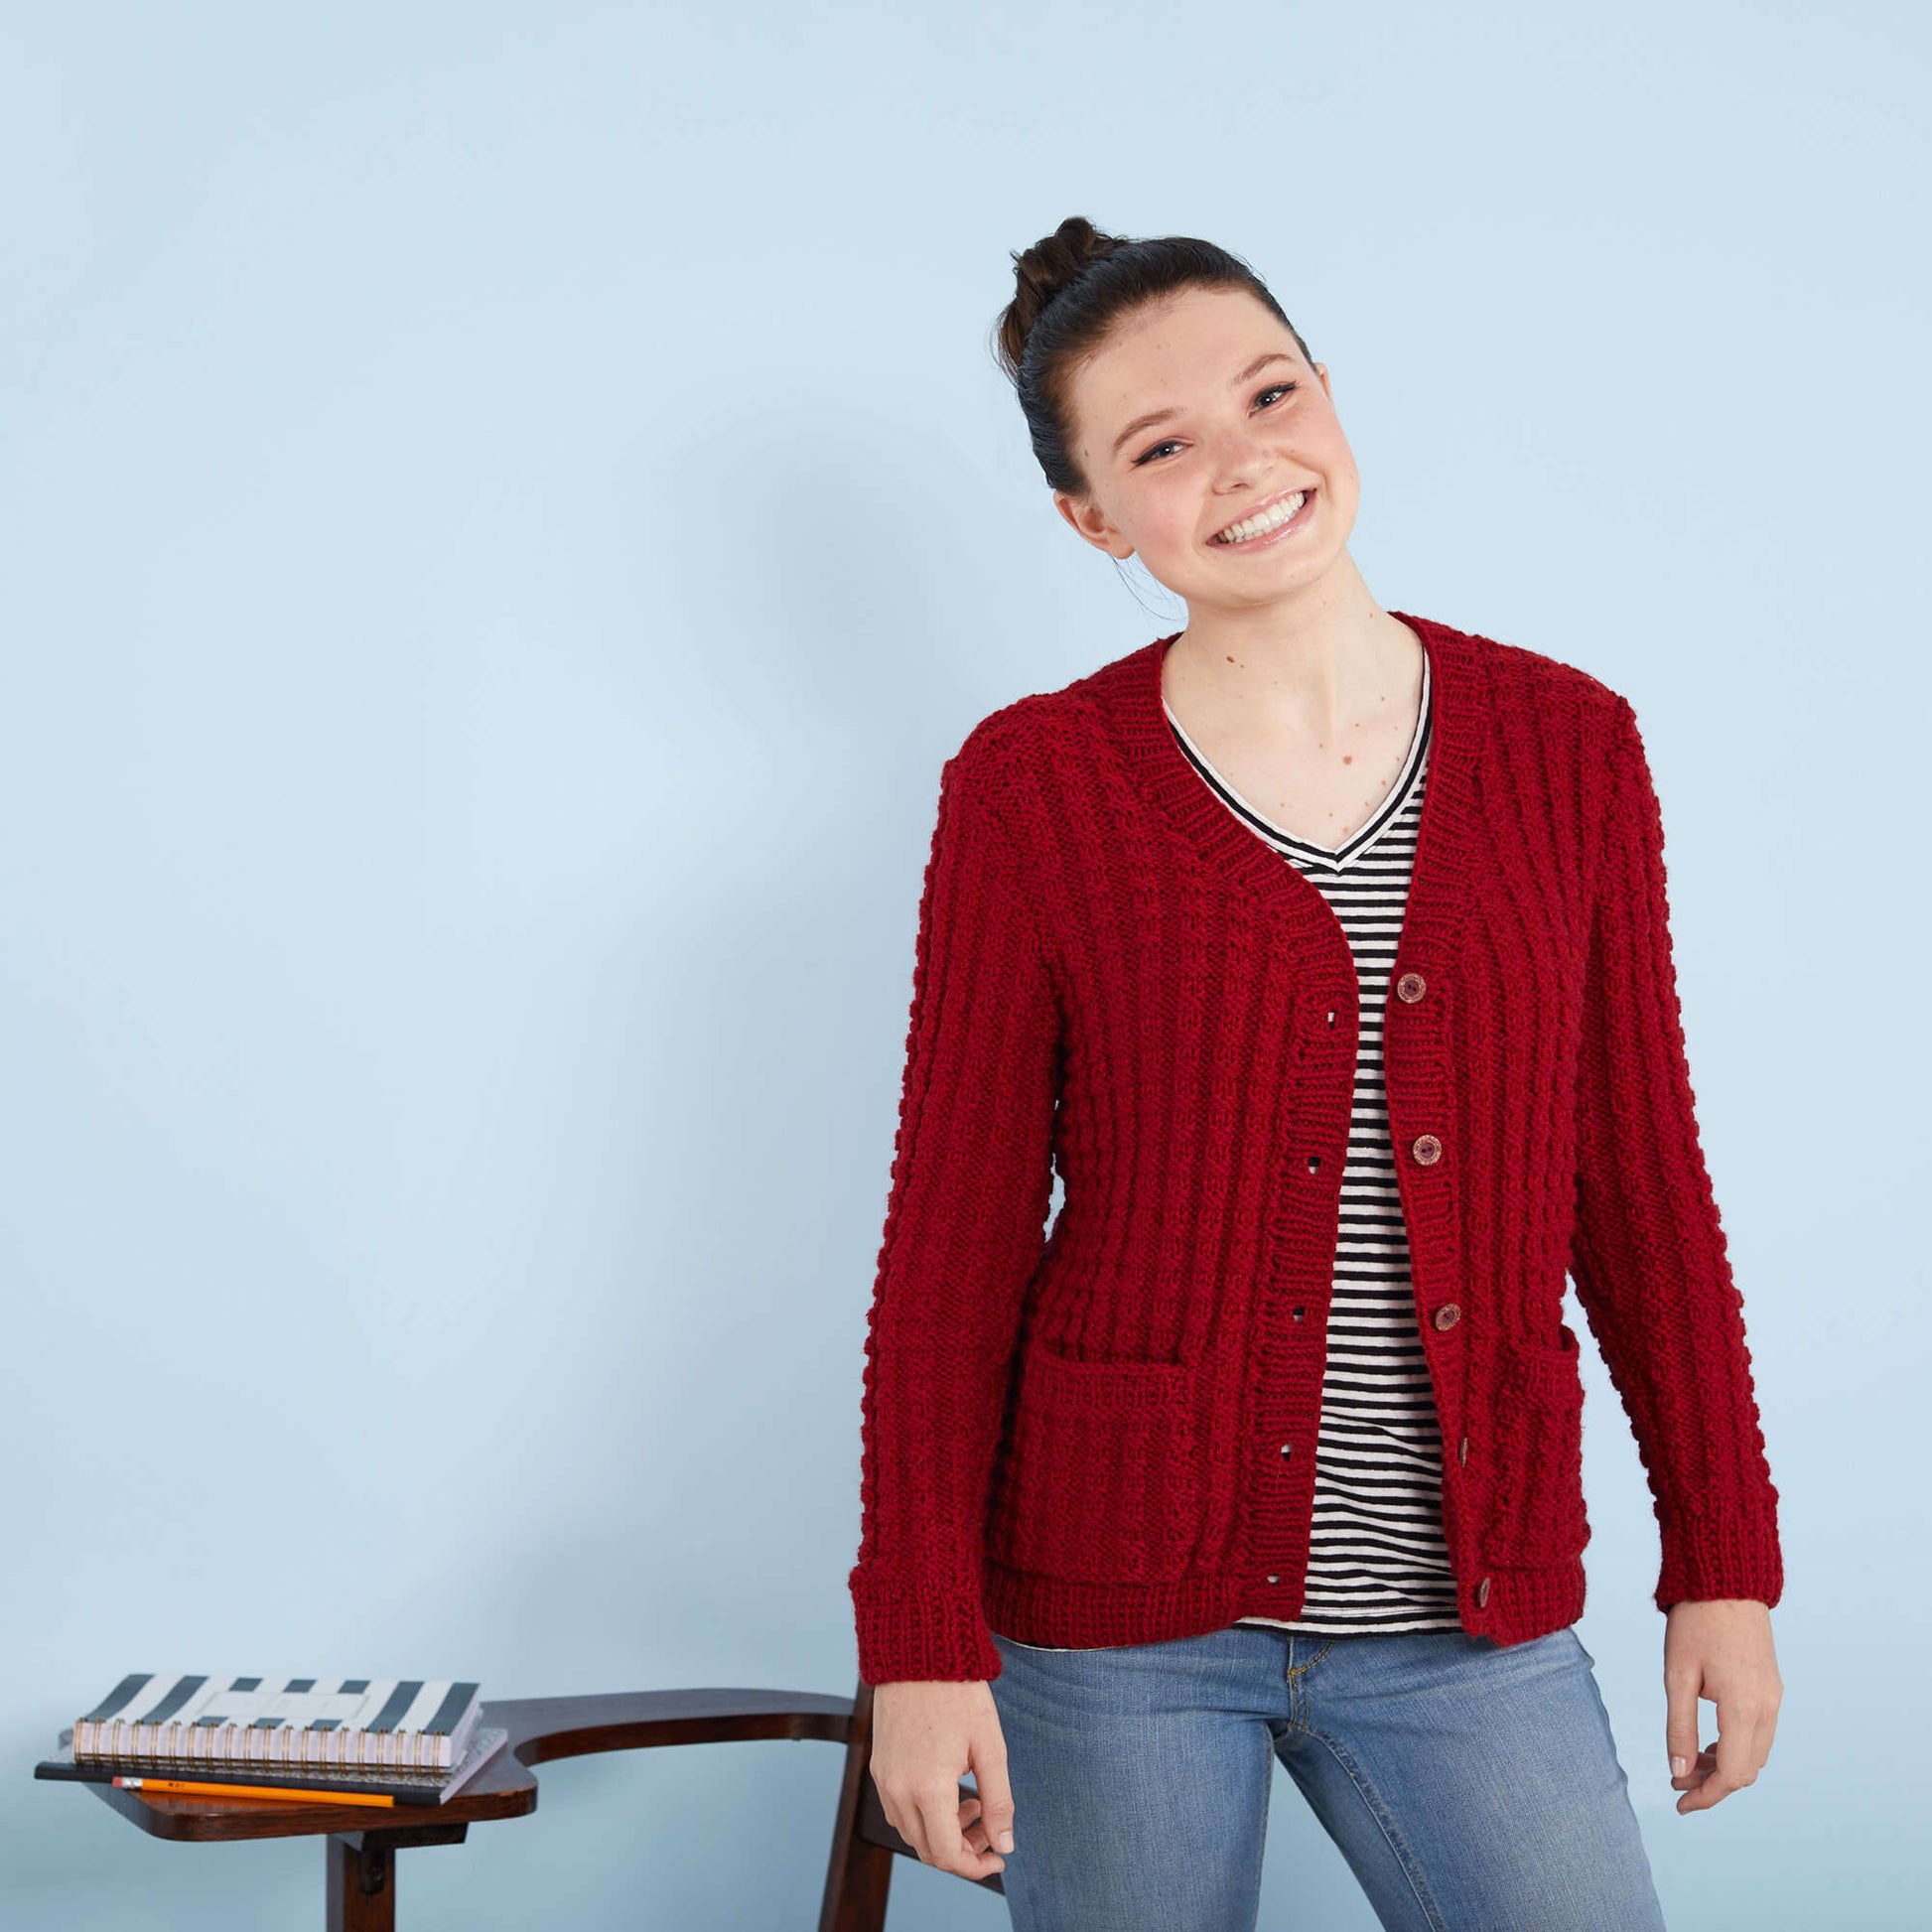 Free Red Heart Chillin' Out Knit Cardigan Pattern